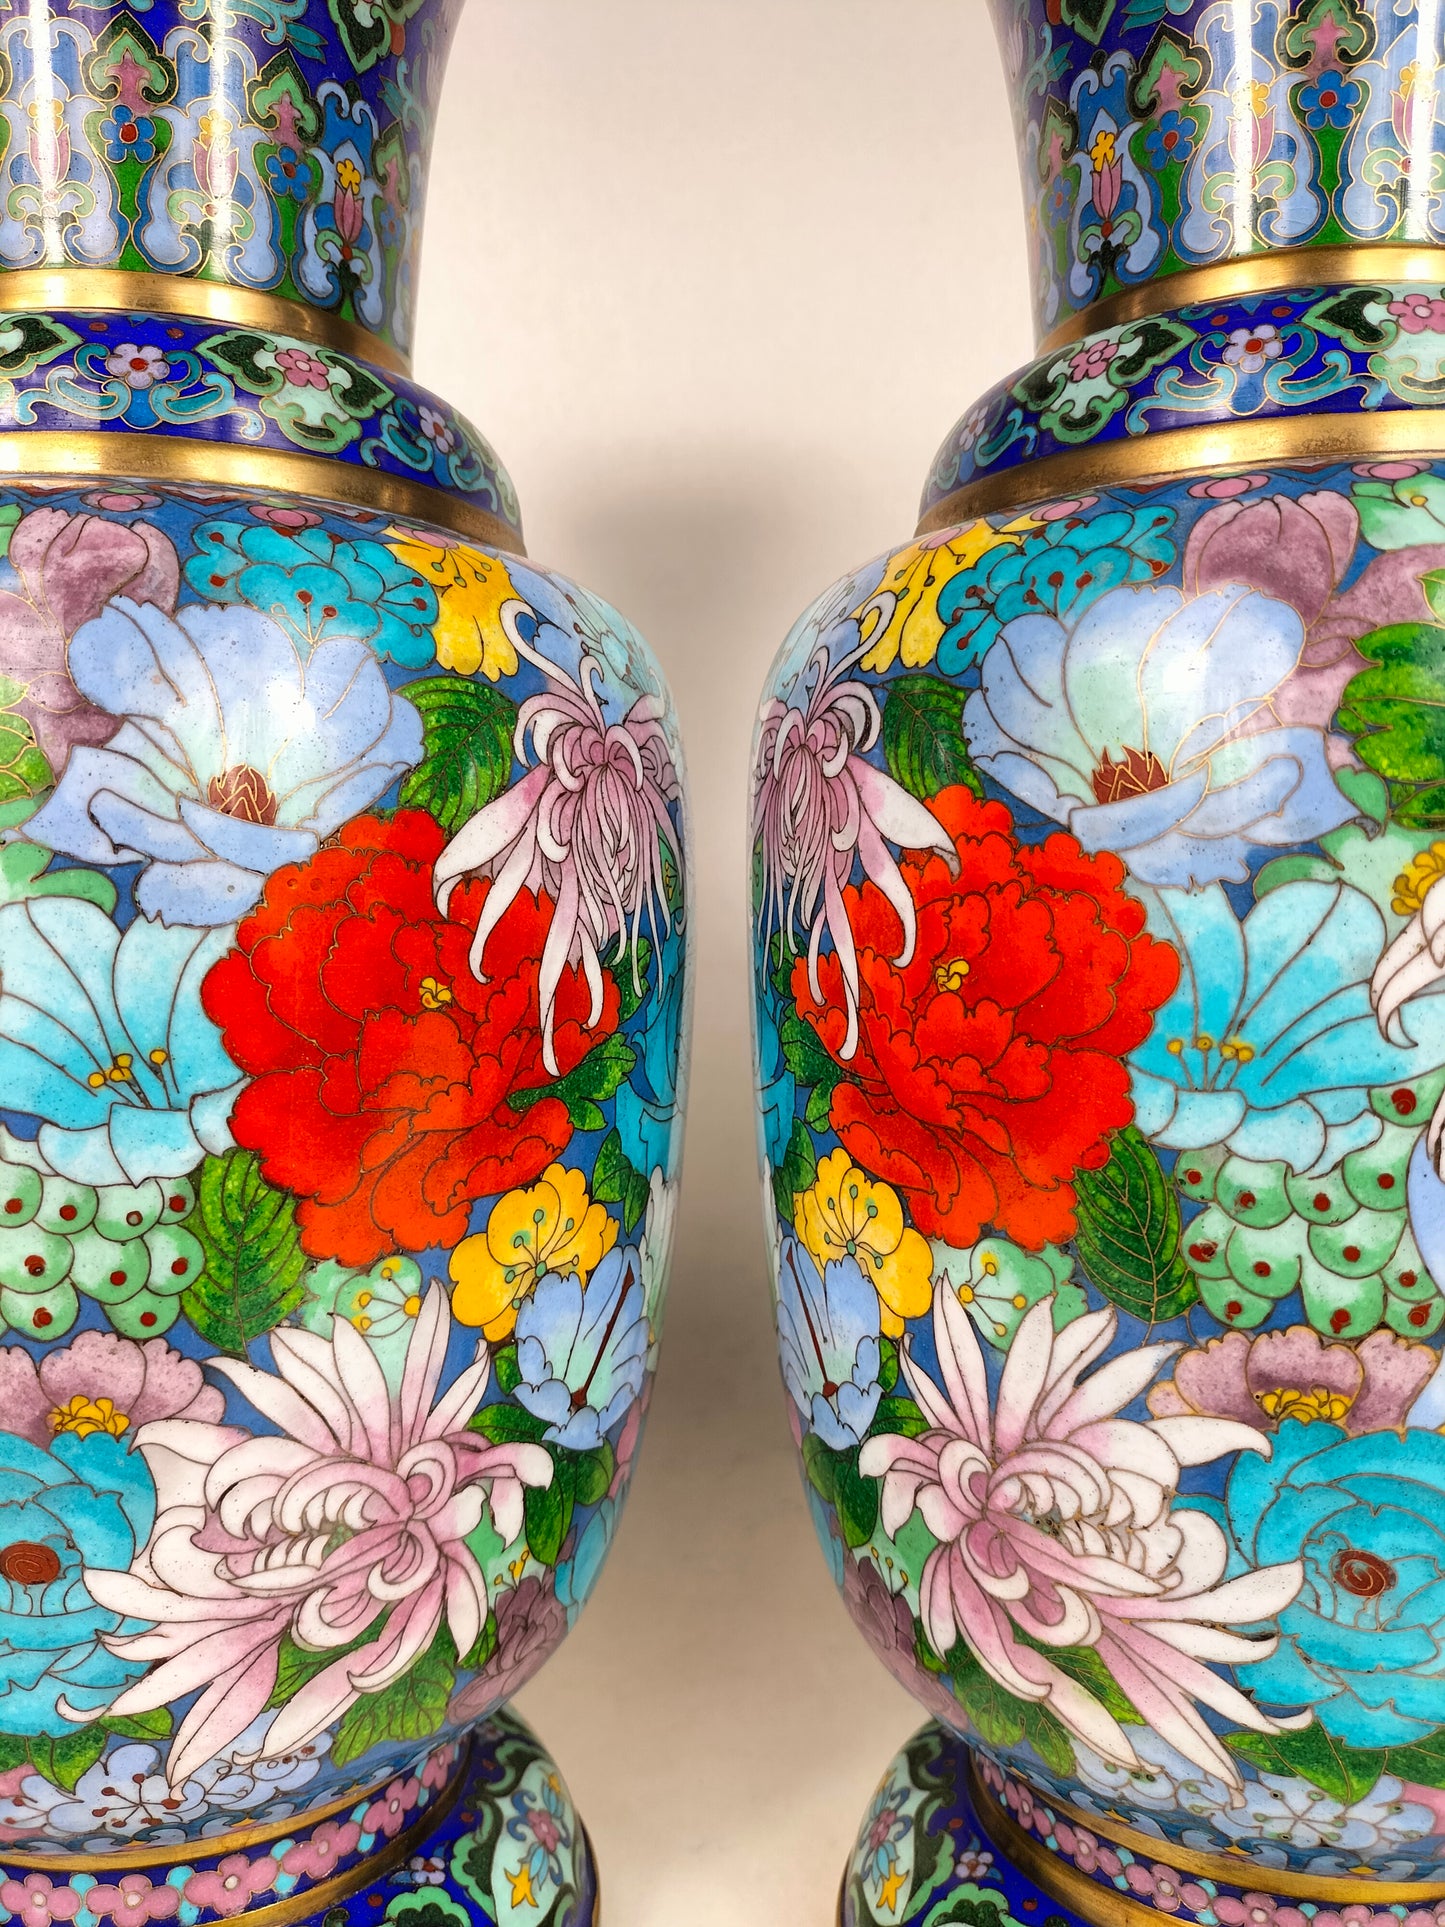 Pair of large Chinese cloisonne millefleur vases // 20th century